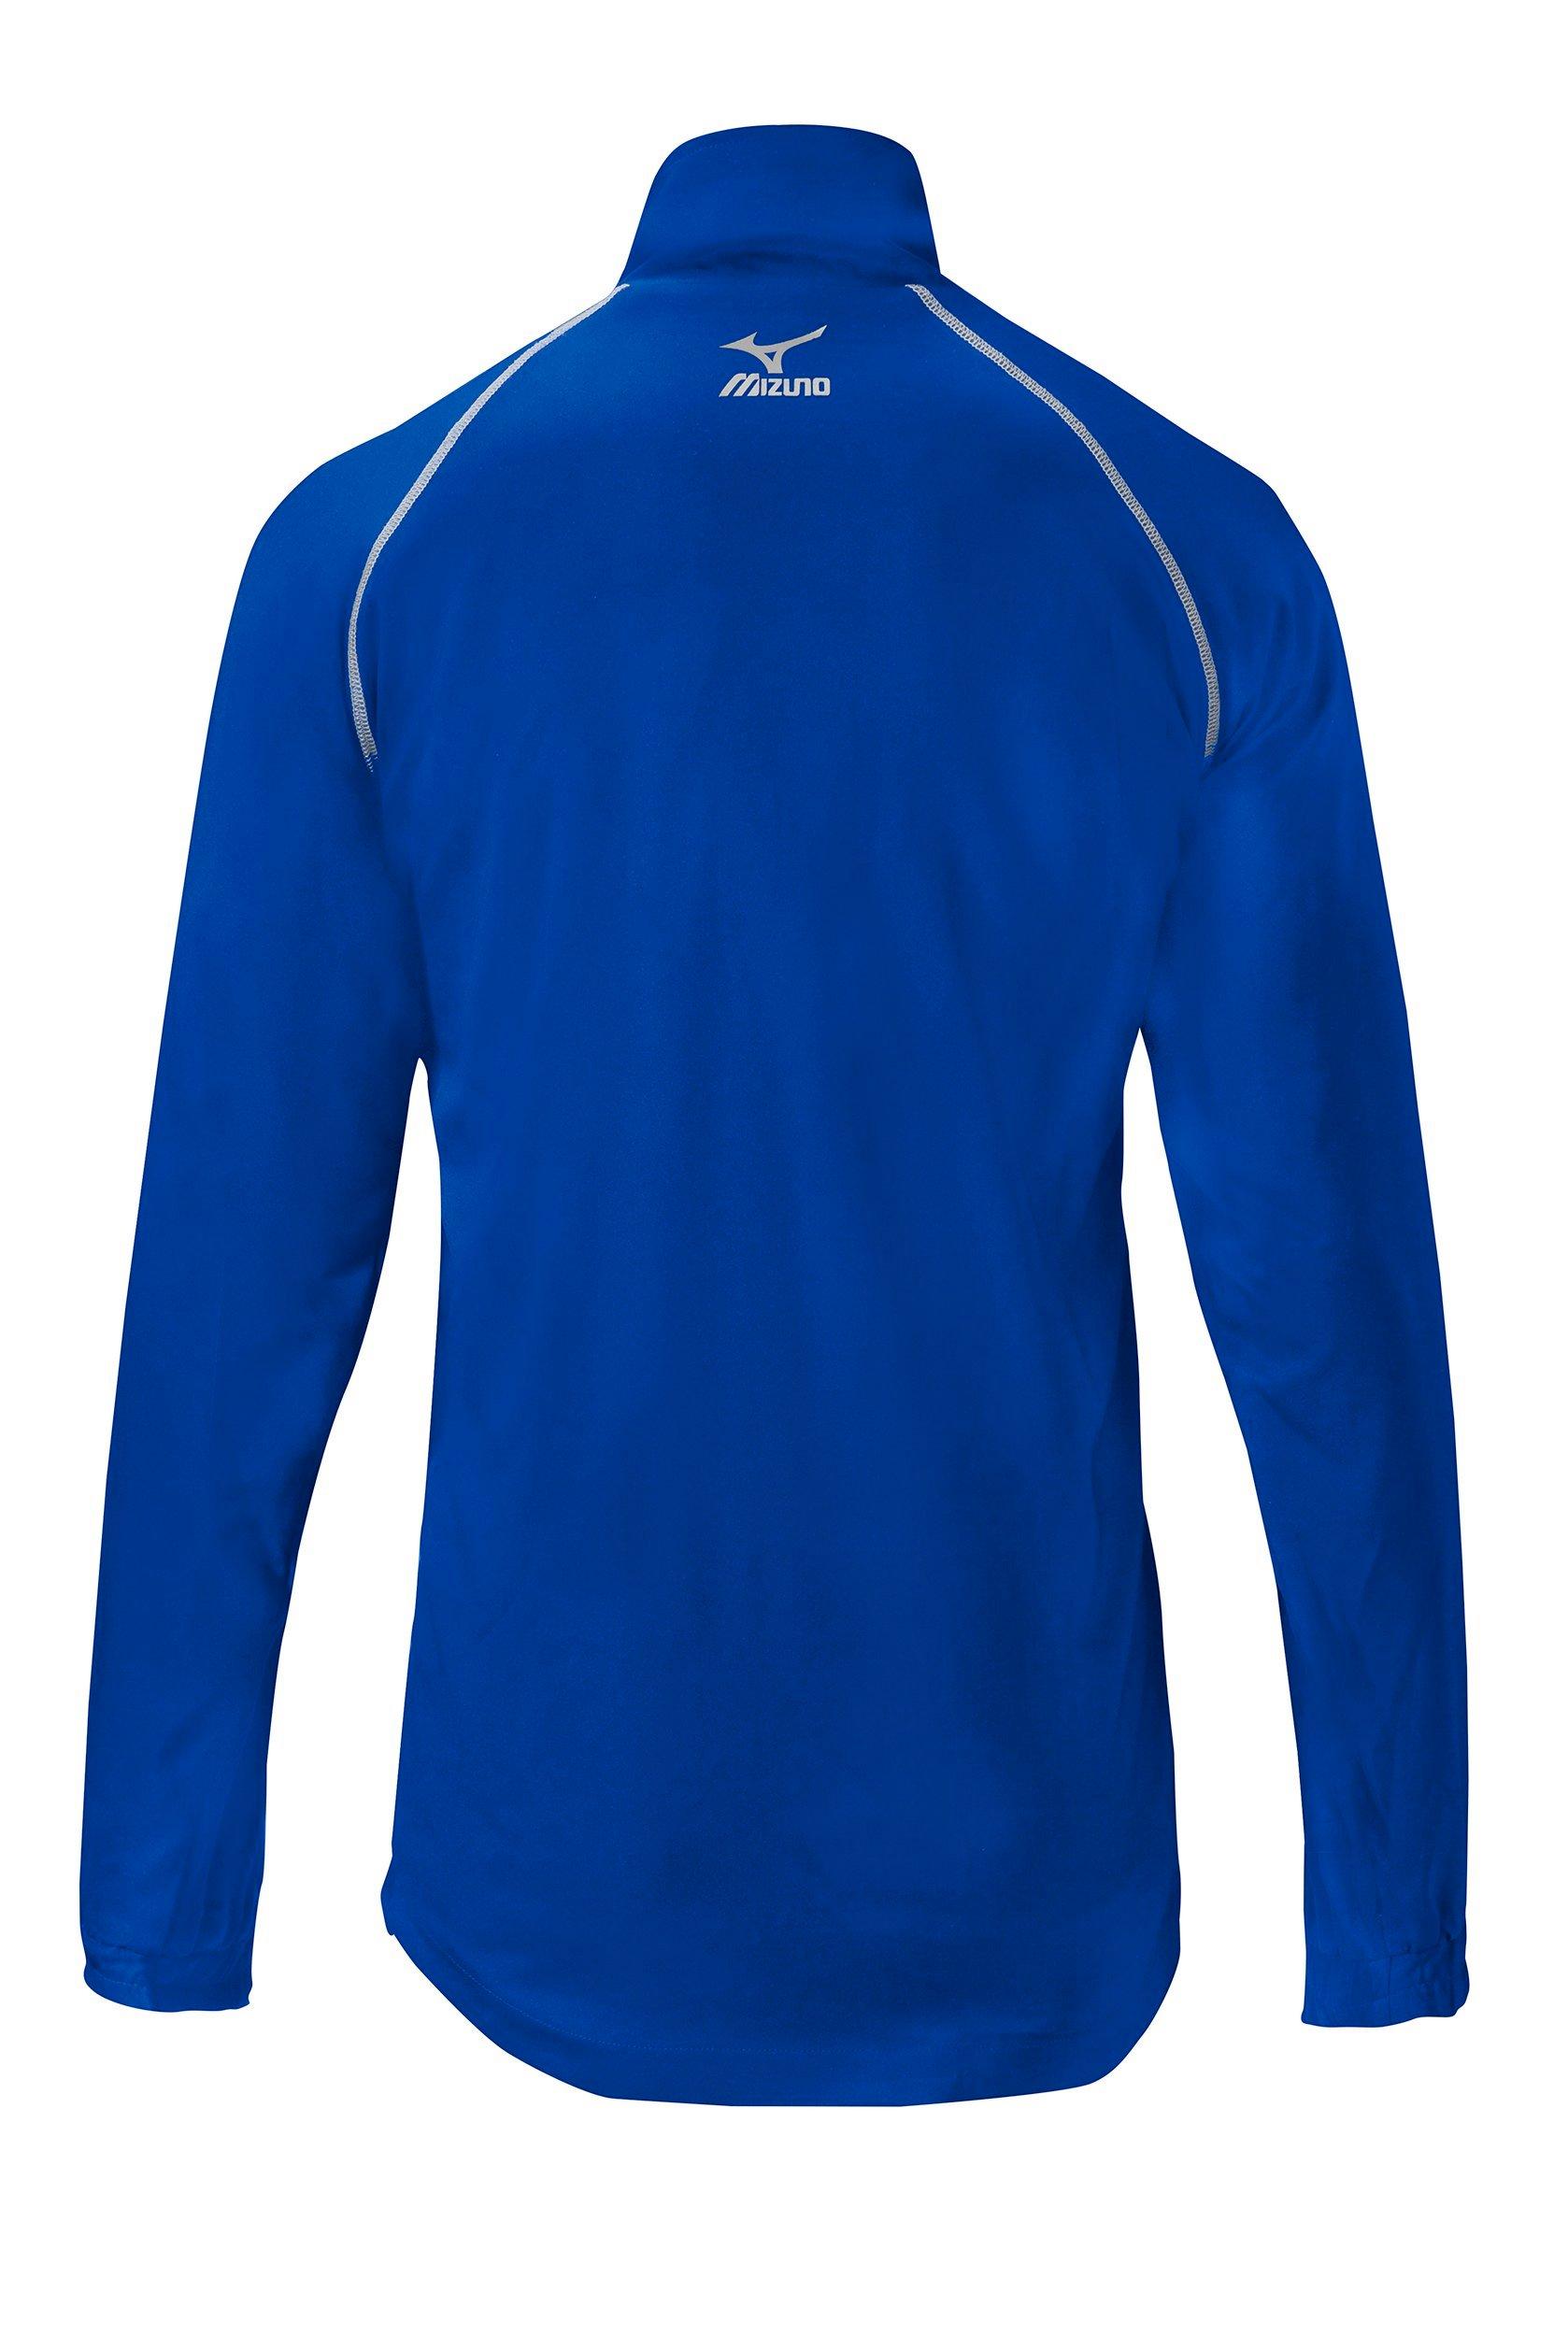 Mizuno Men's Comp 1/4 Zip Pullover, Size Extra Extra Large, Royal (5252) - image 1 of 3